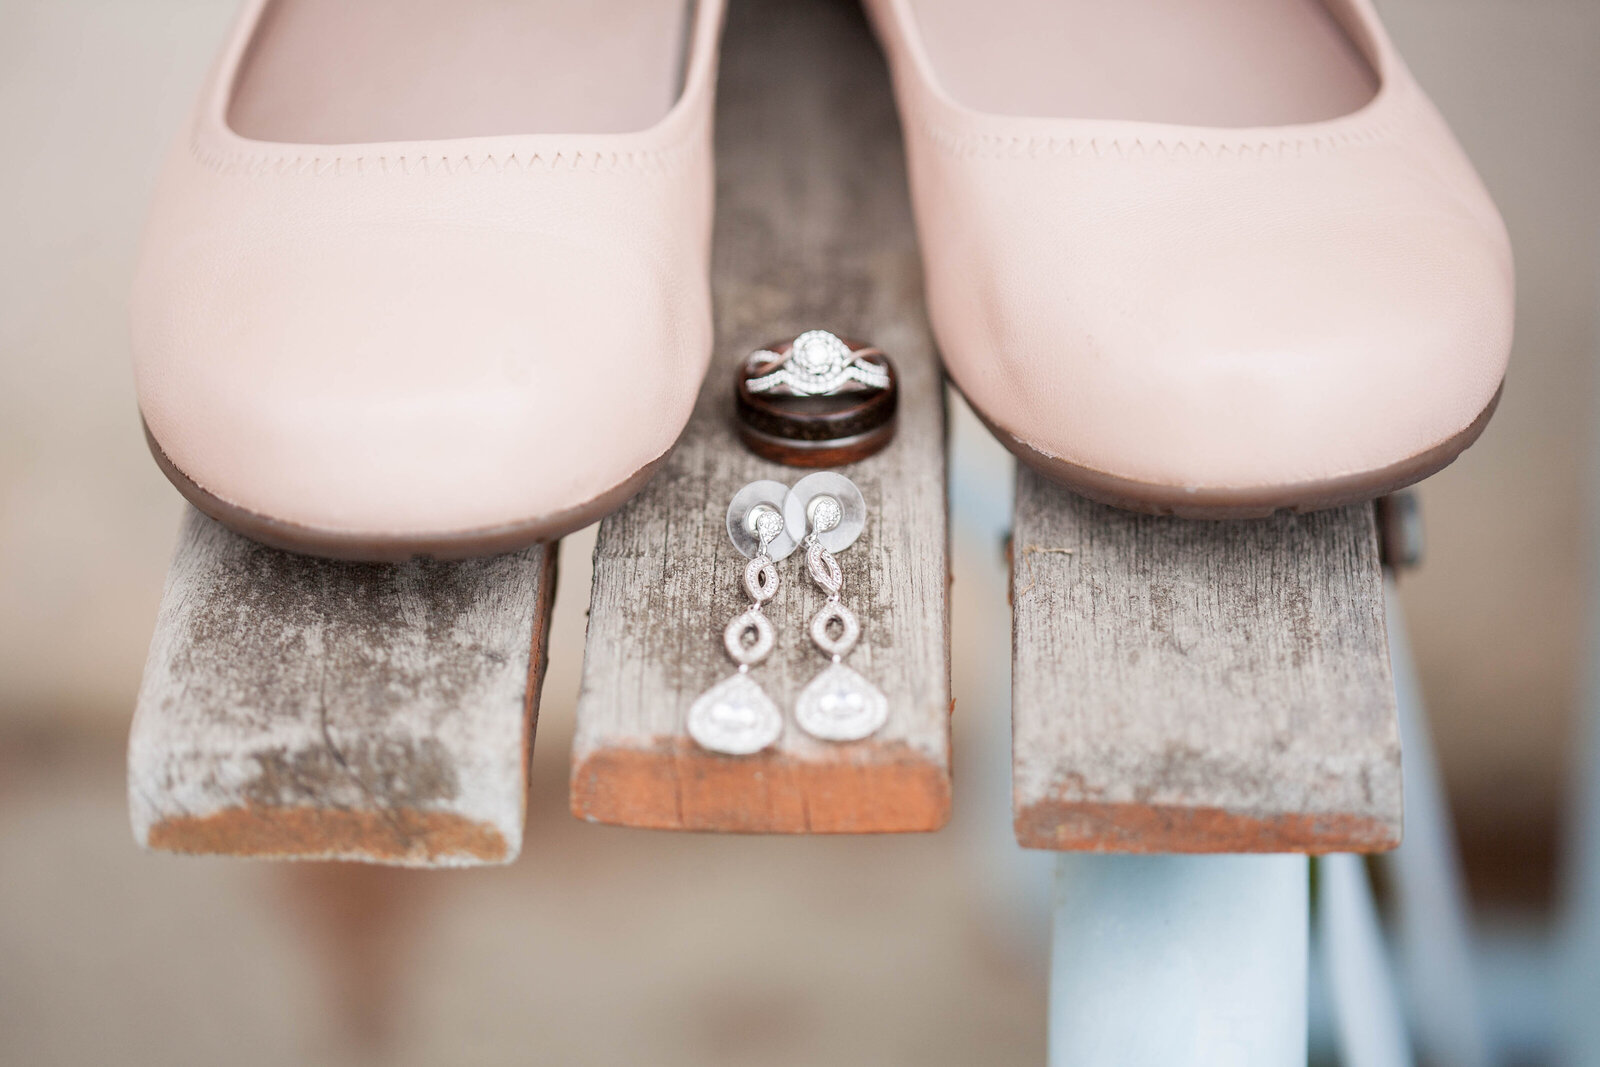 A pair of pink shoes and wedding jewelry.